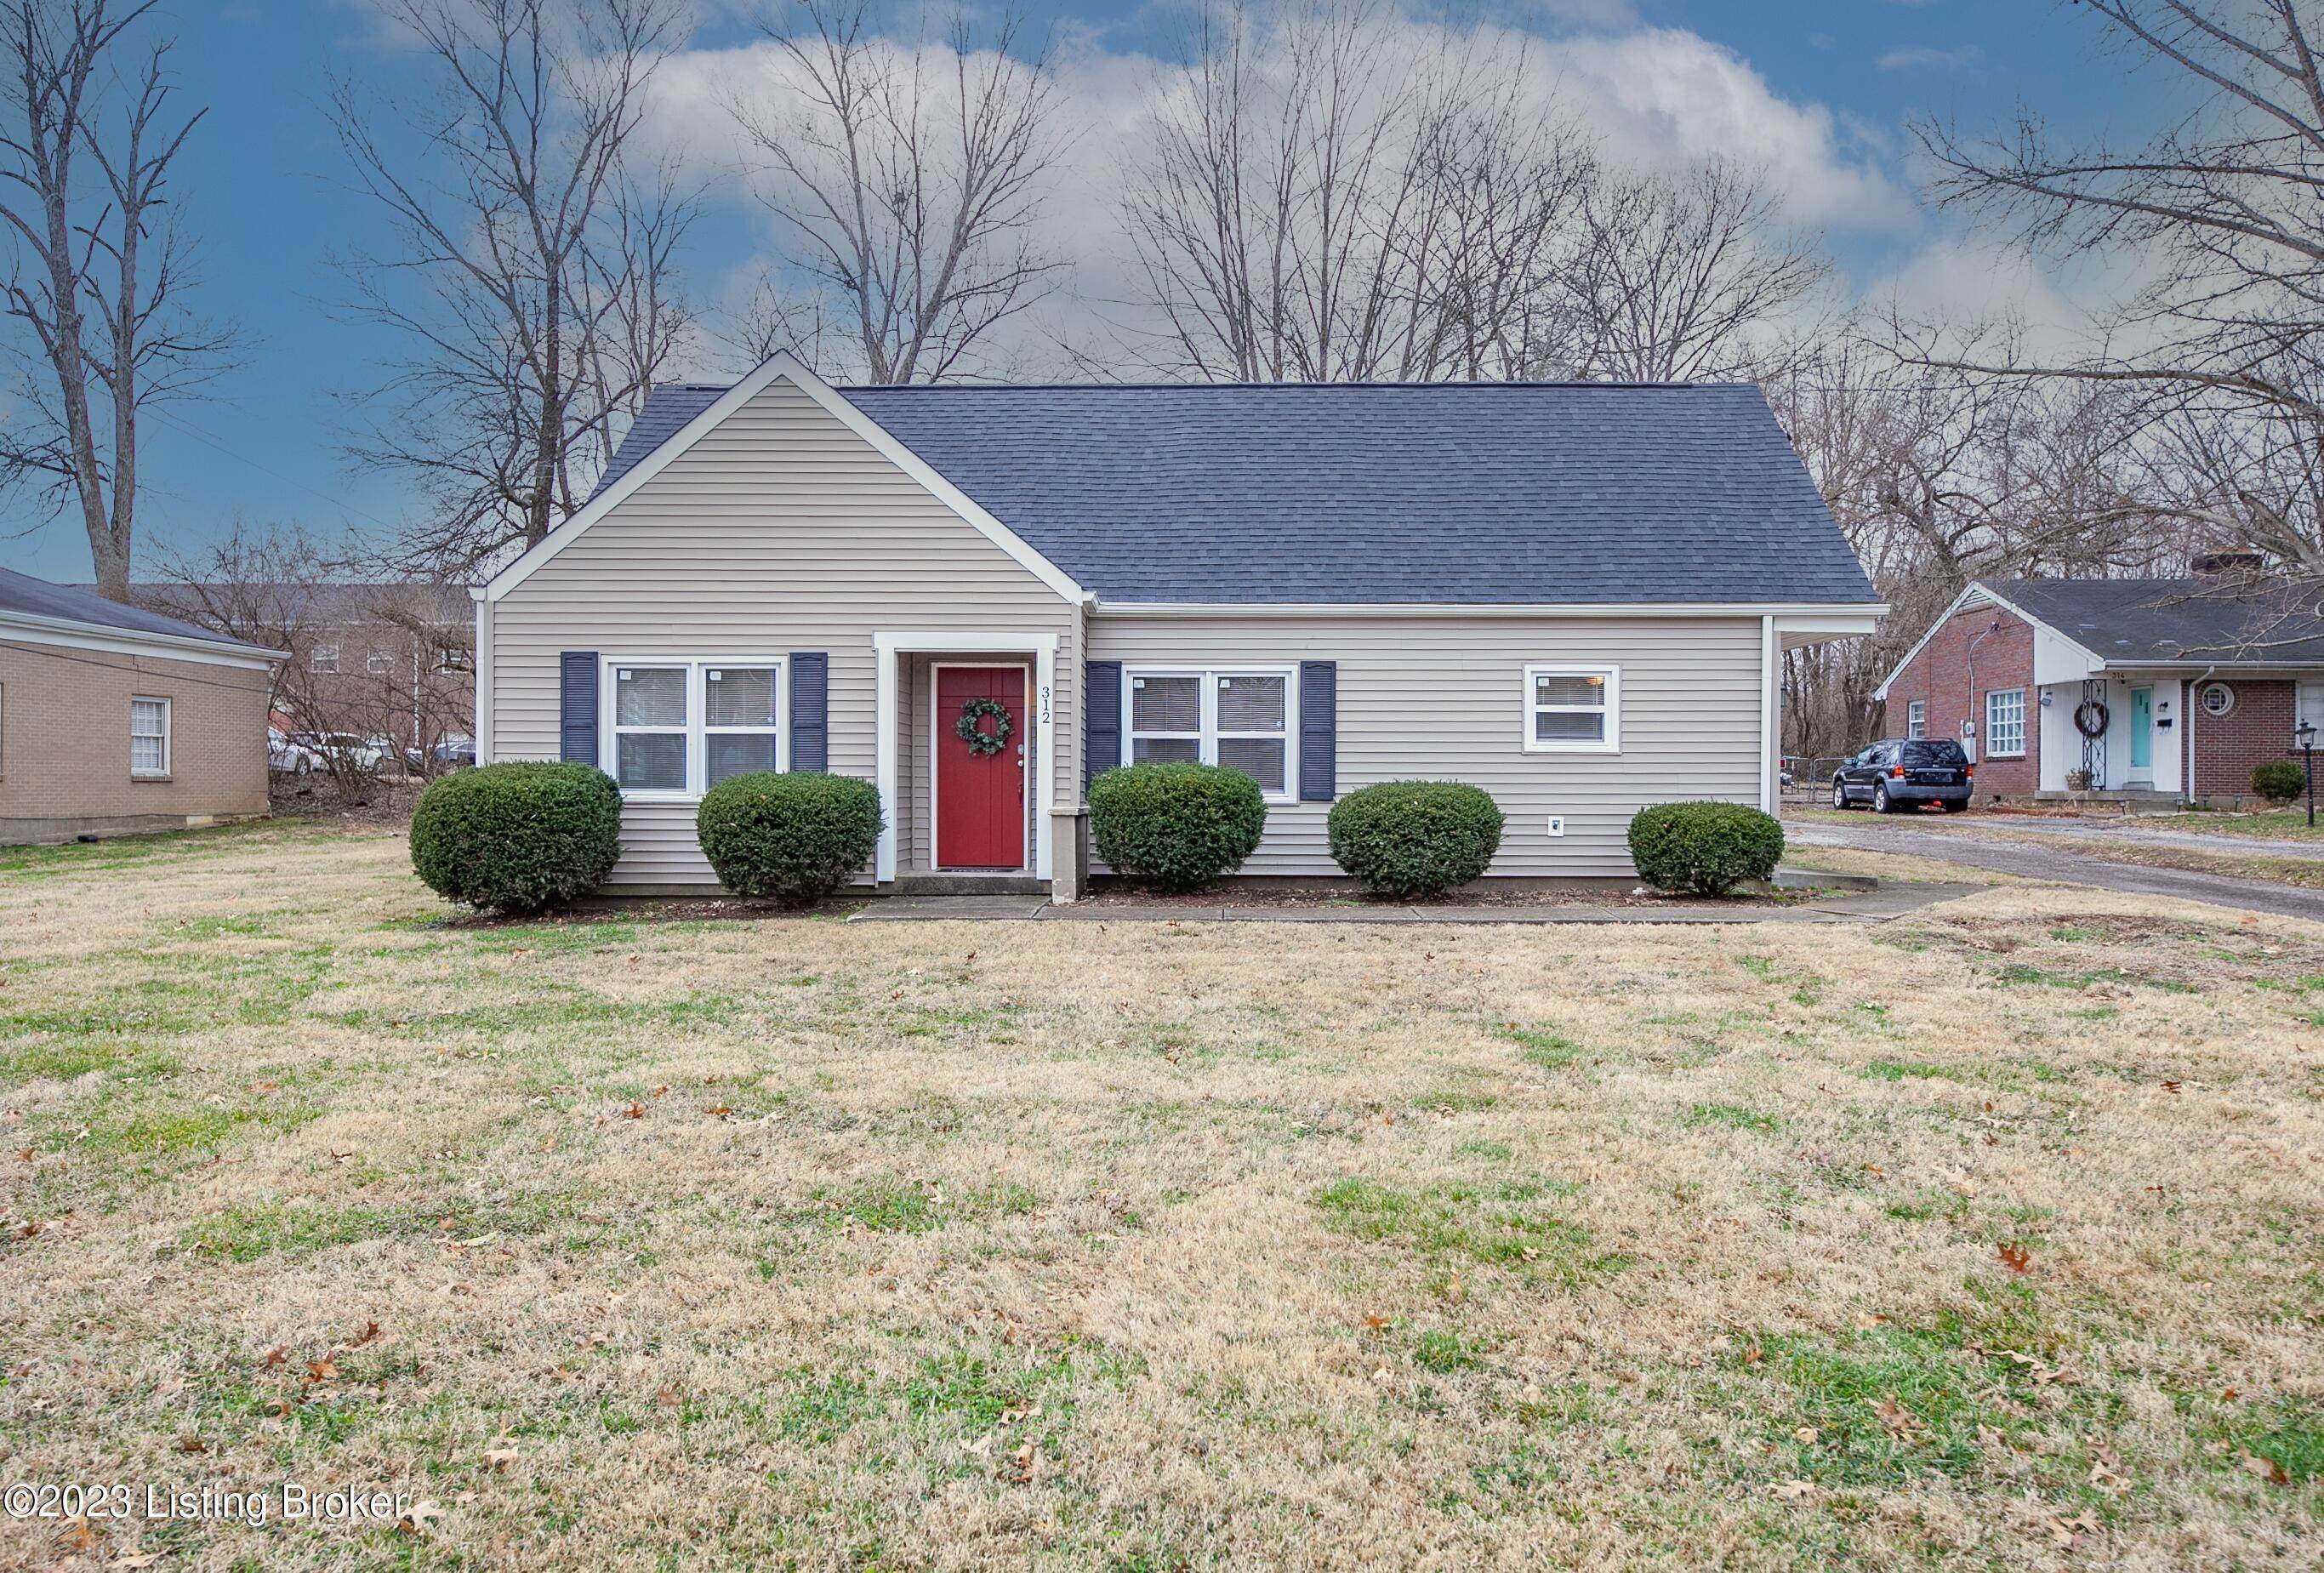 22. Single Family at Louisville, KY 40207